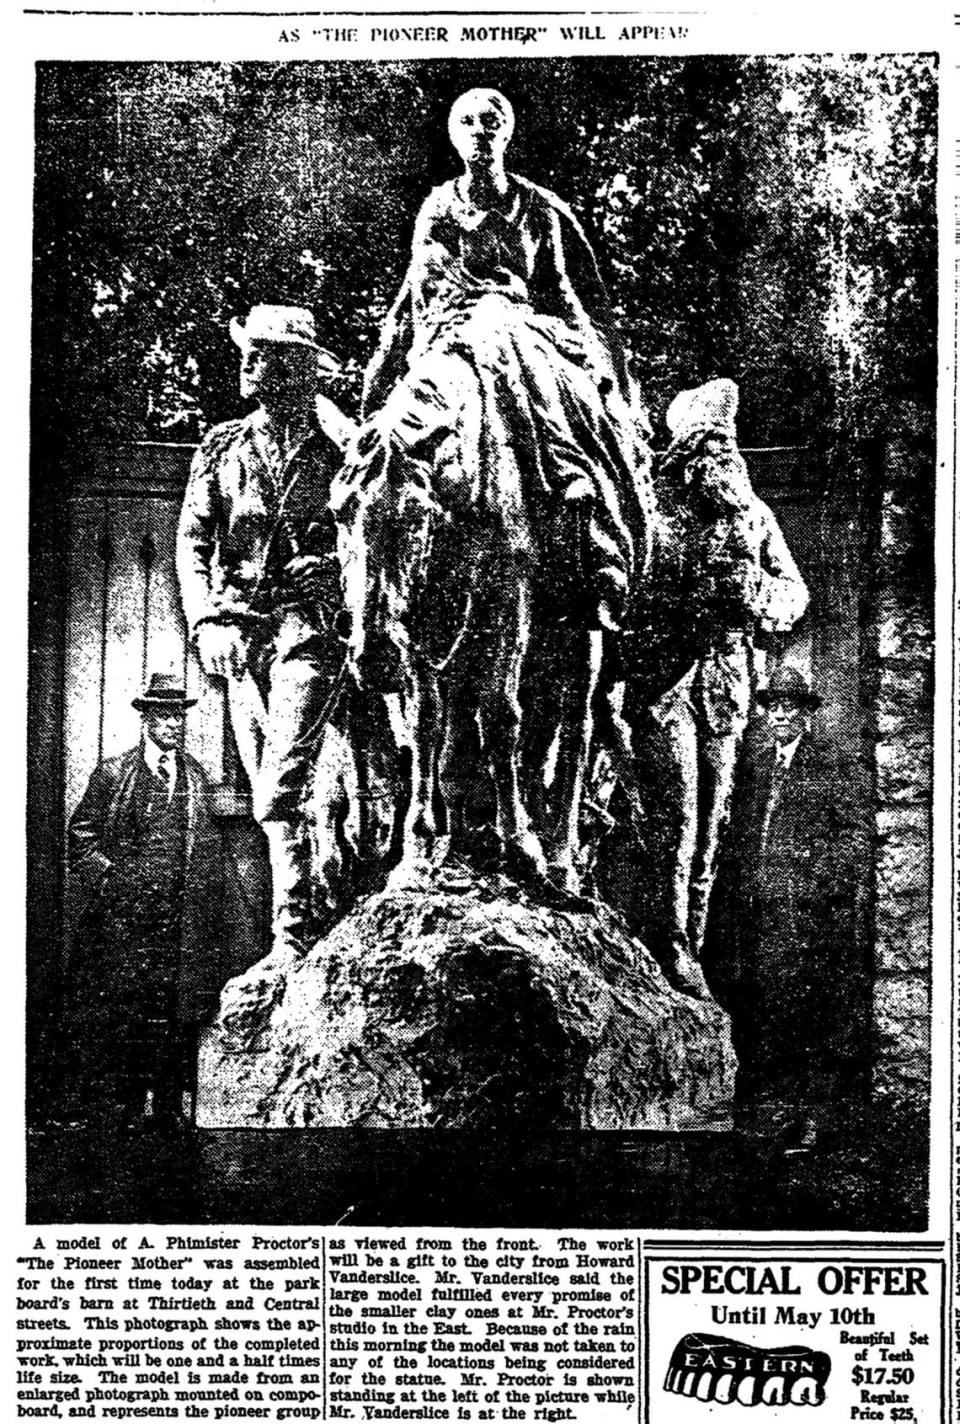 Photographic model of the Pioneer Mother, The Kansas City Star, April 29, 1928.